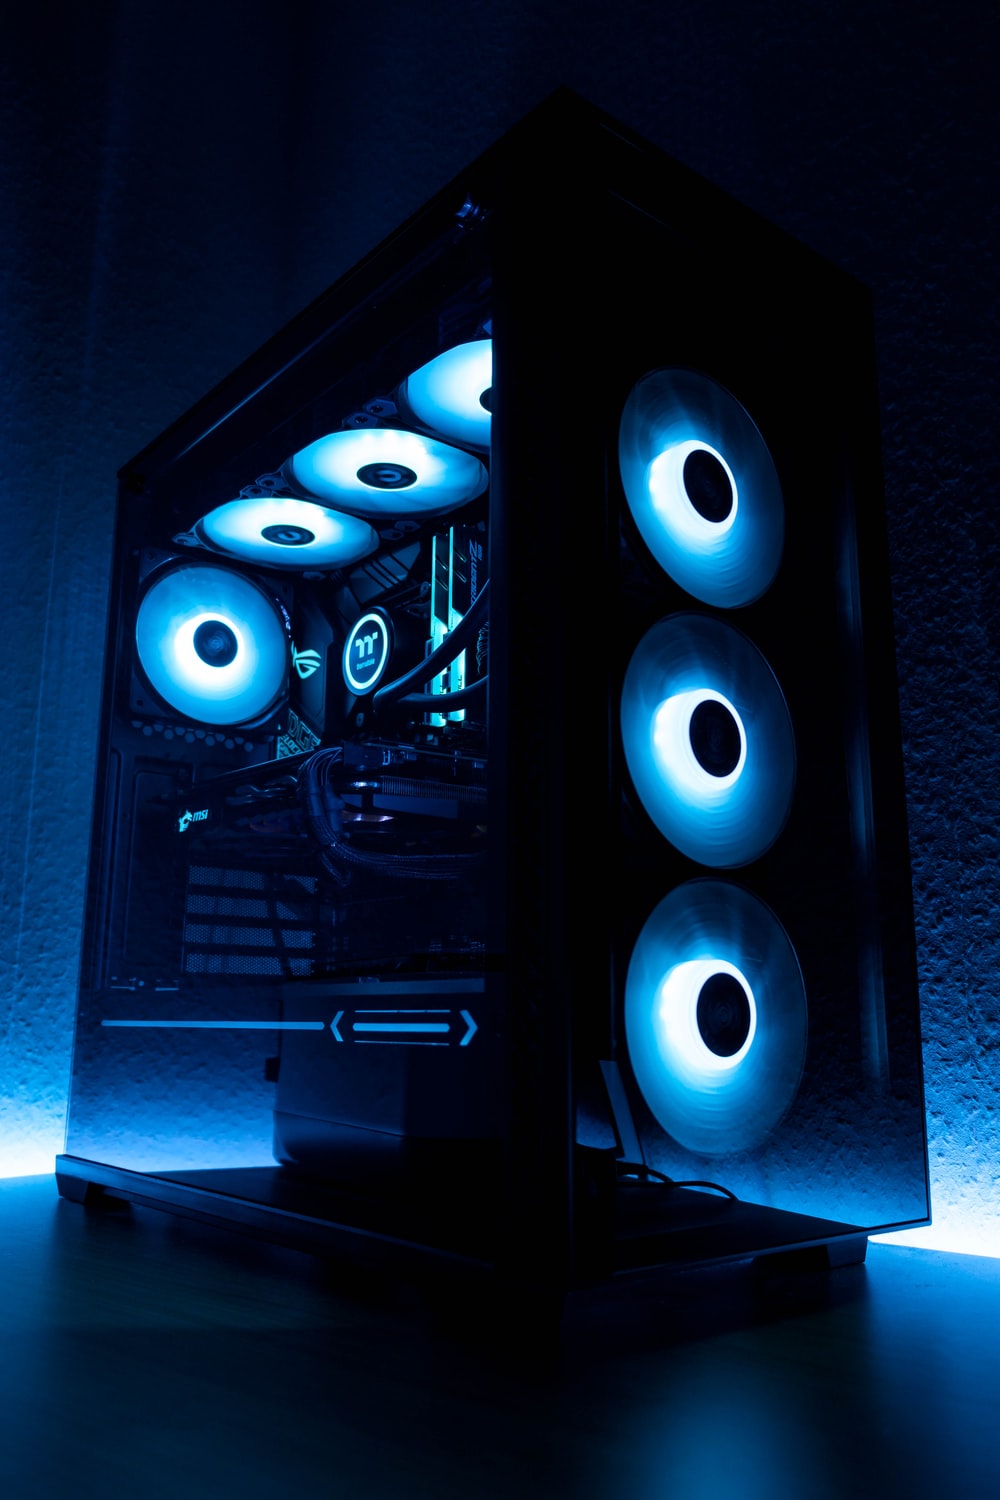 Pc Inside Picture. Download Free Image